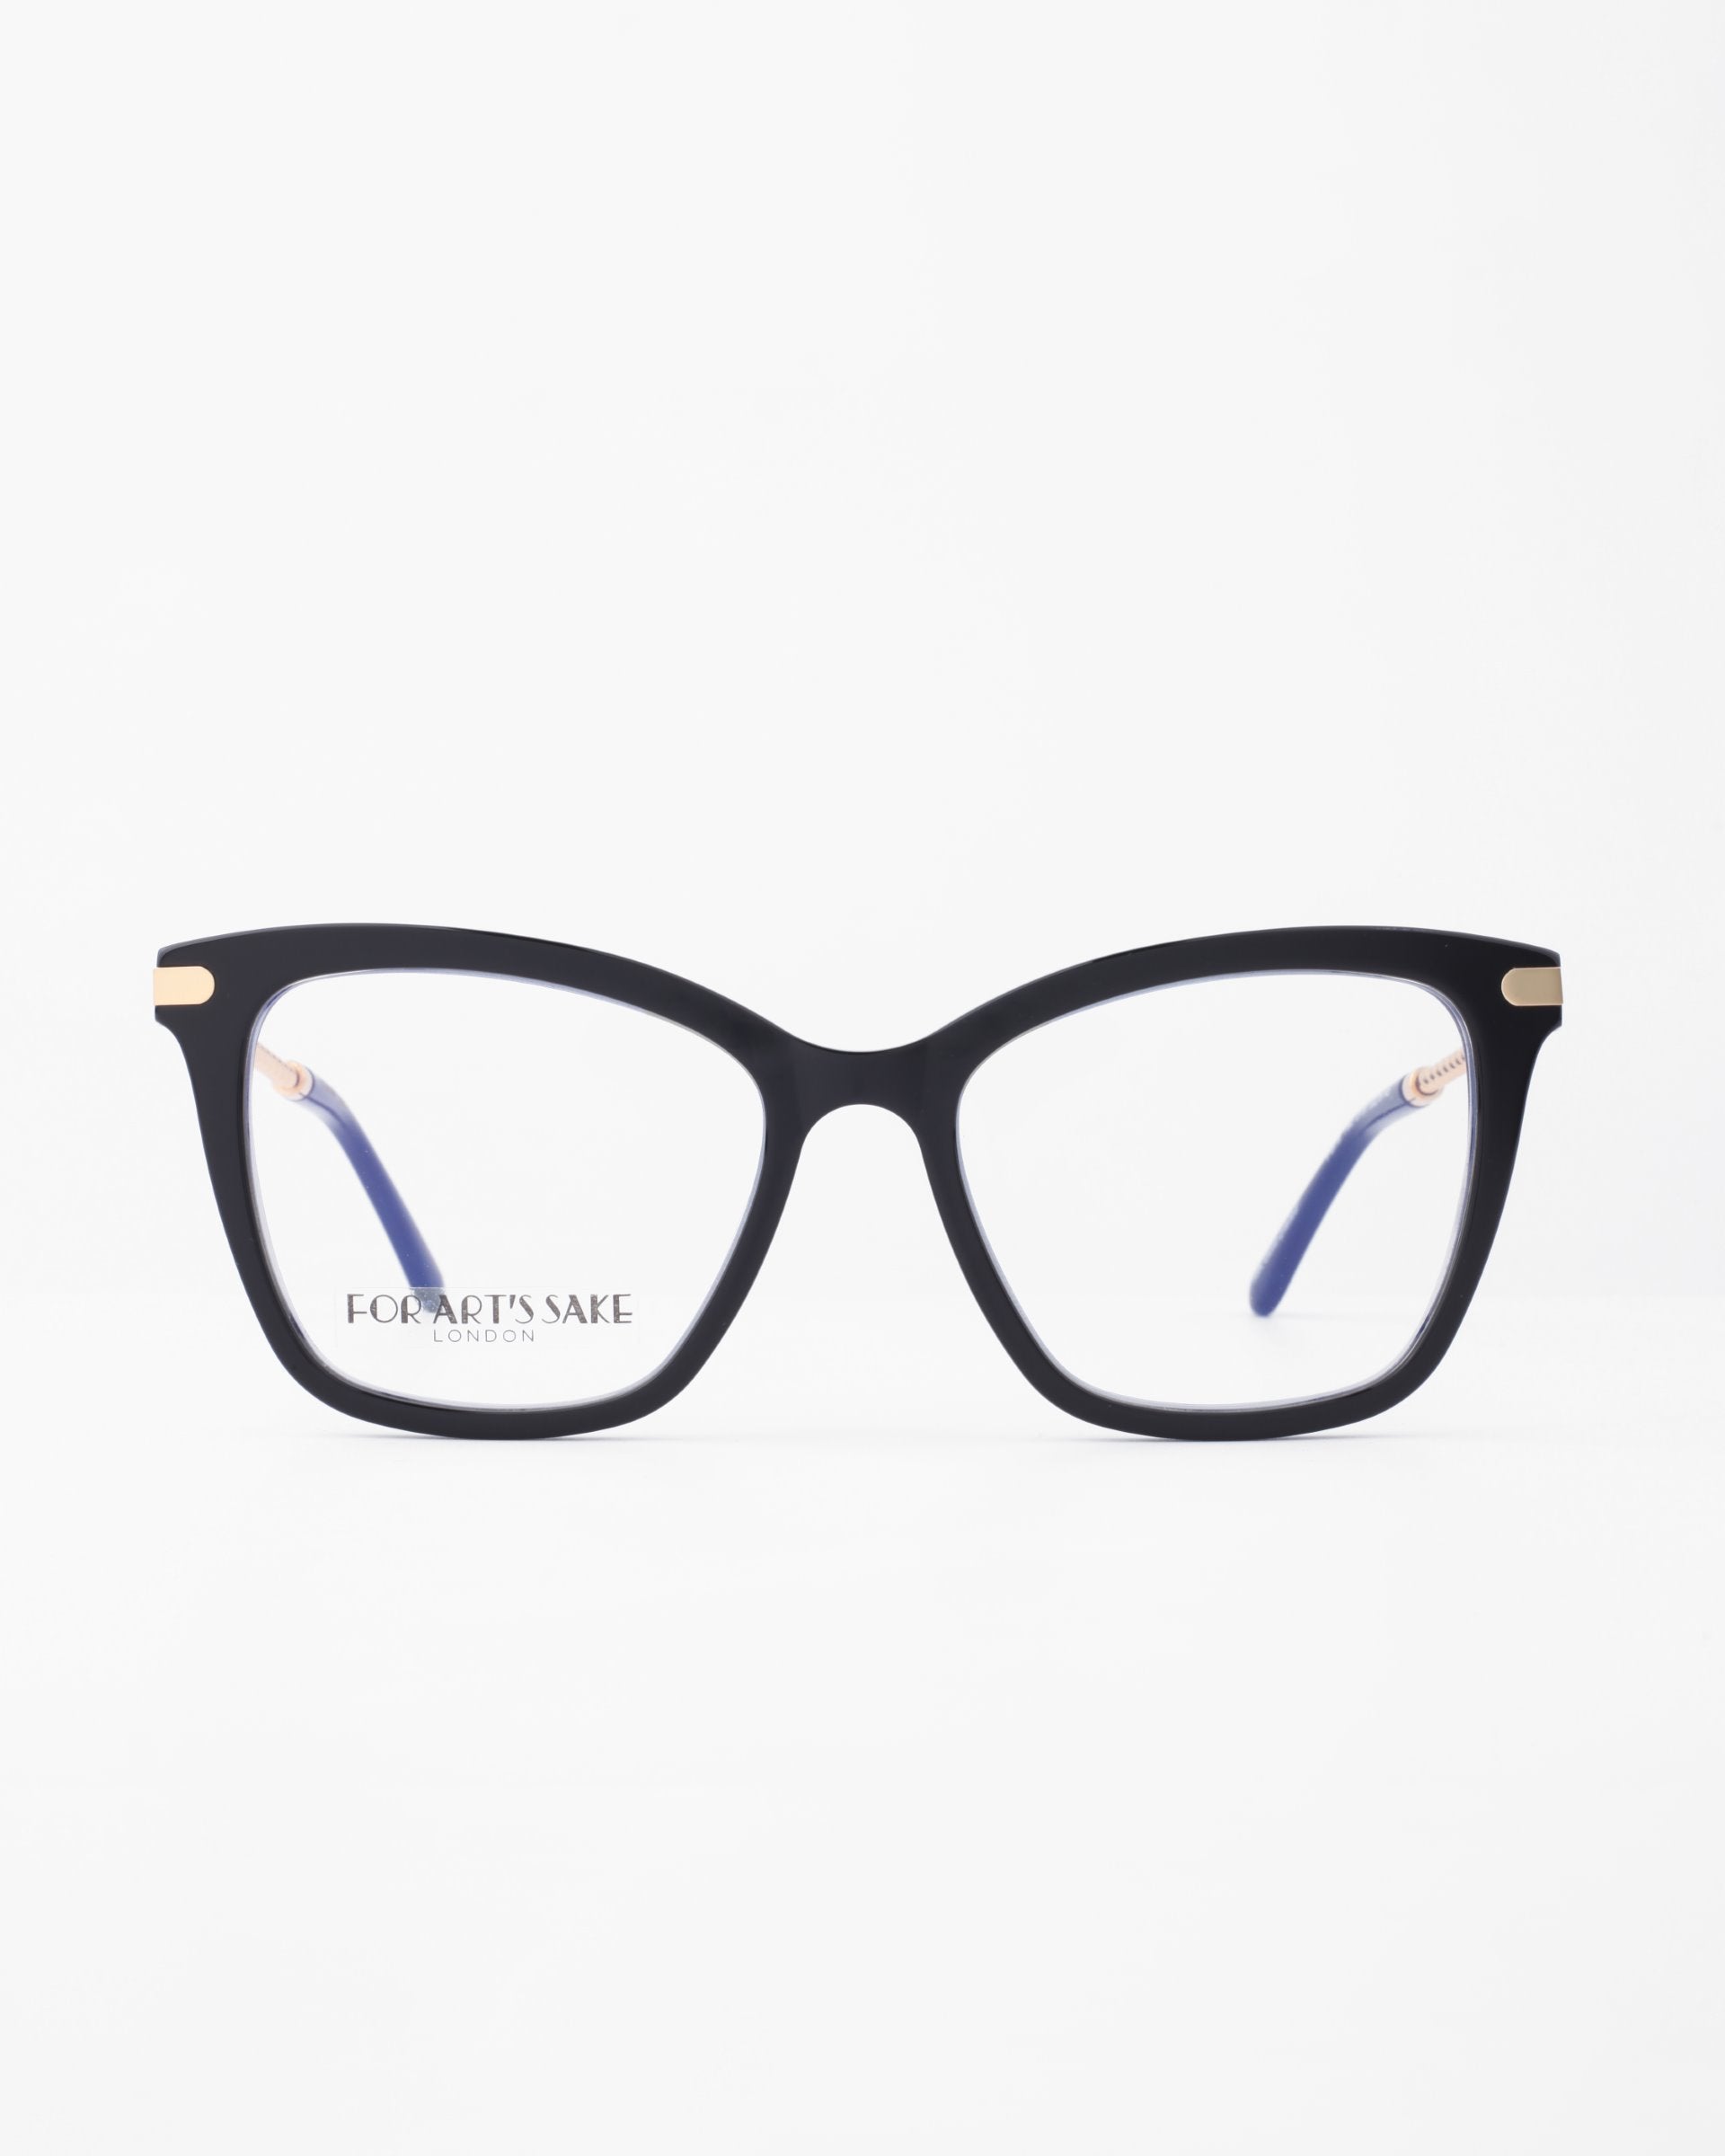 A pair of black, rectangular eyeglass frames with the brand name "For Art's Sake®" engraved on one of the lenses. The inner sides of the temples are blue, and the top corners feature small gold accents. These Paris Two frames include a blue light filter for added eye comfort. The background is plain white.